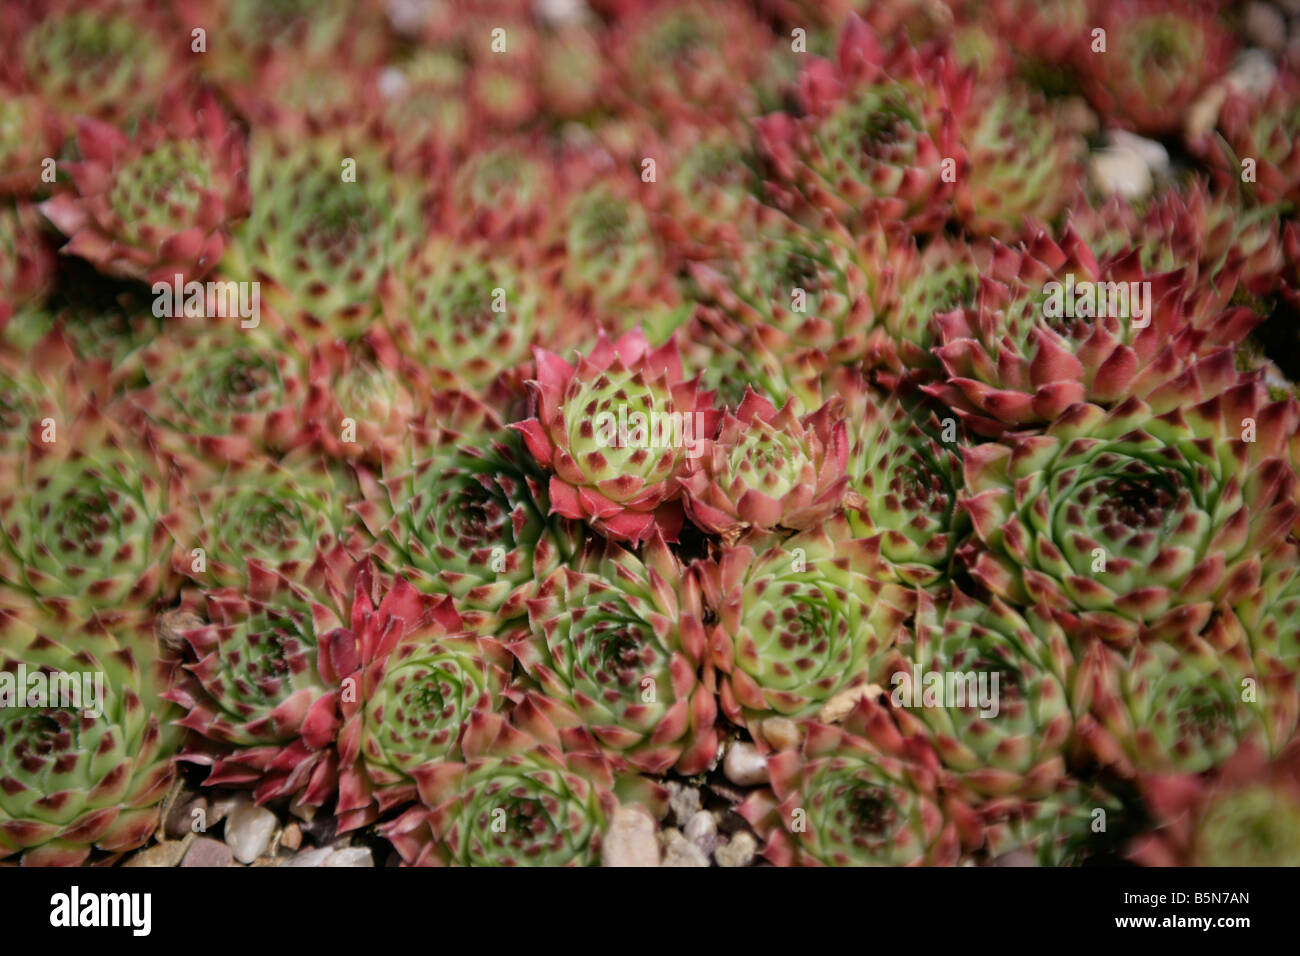 Lots of small succulent red and green cacti plants Stock Photo